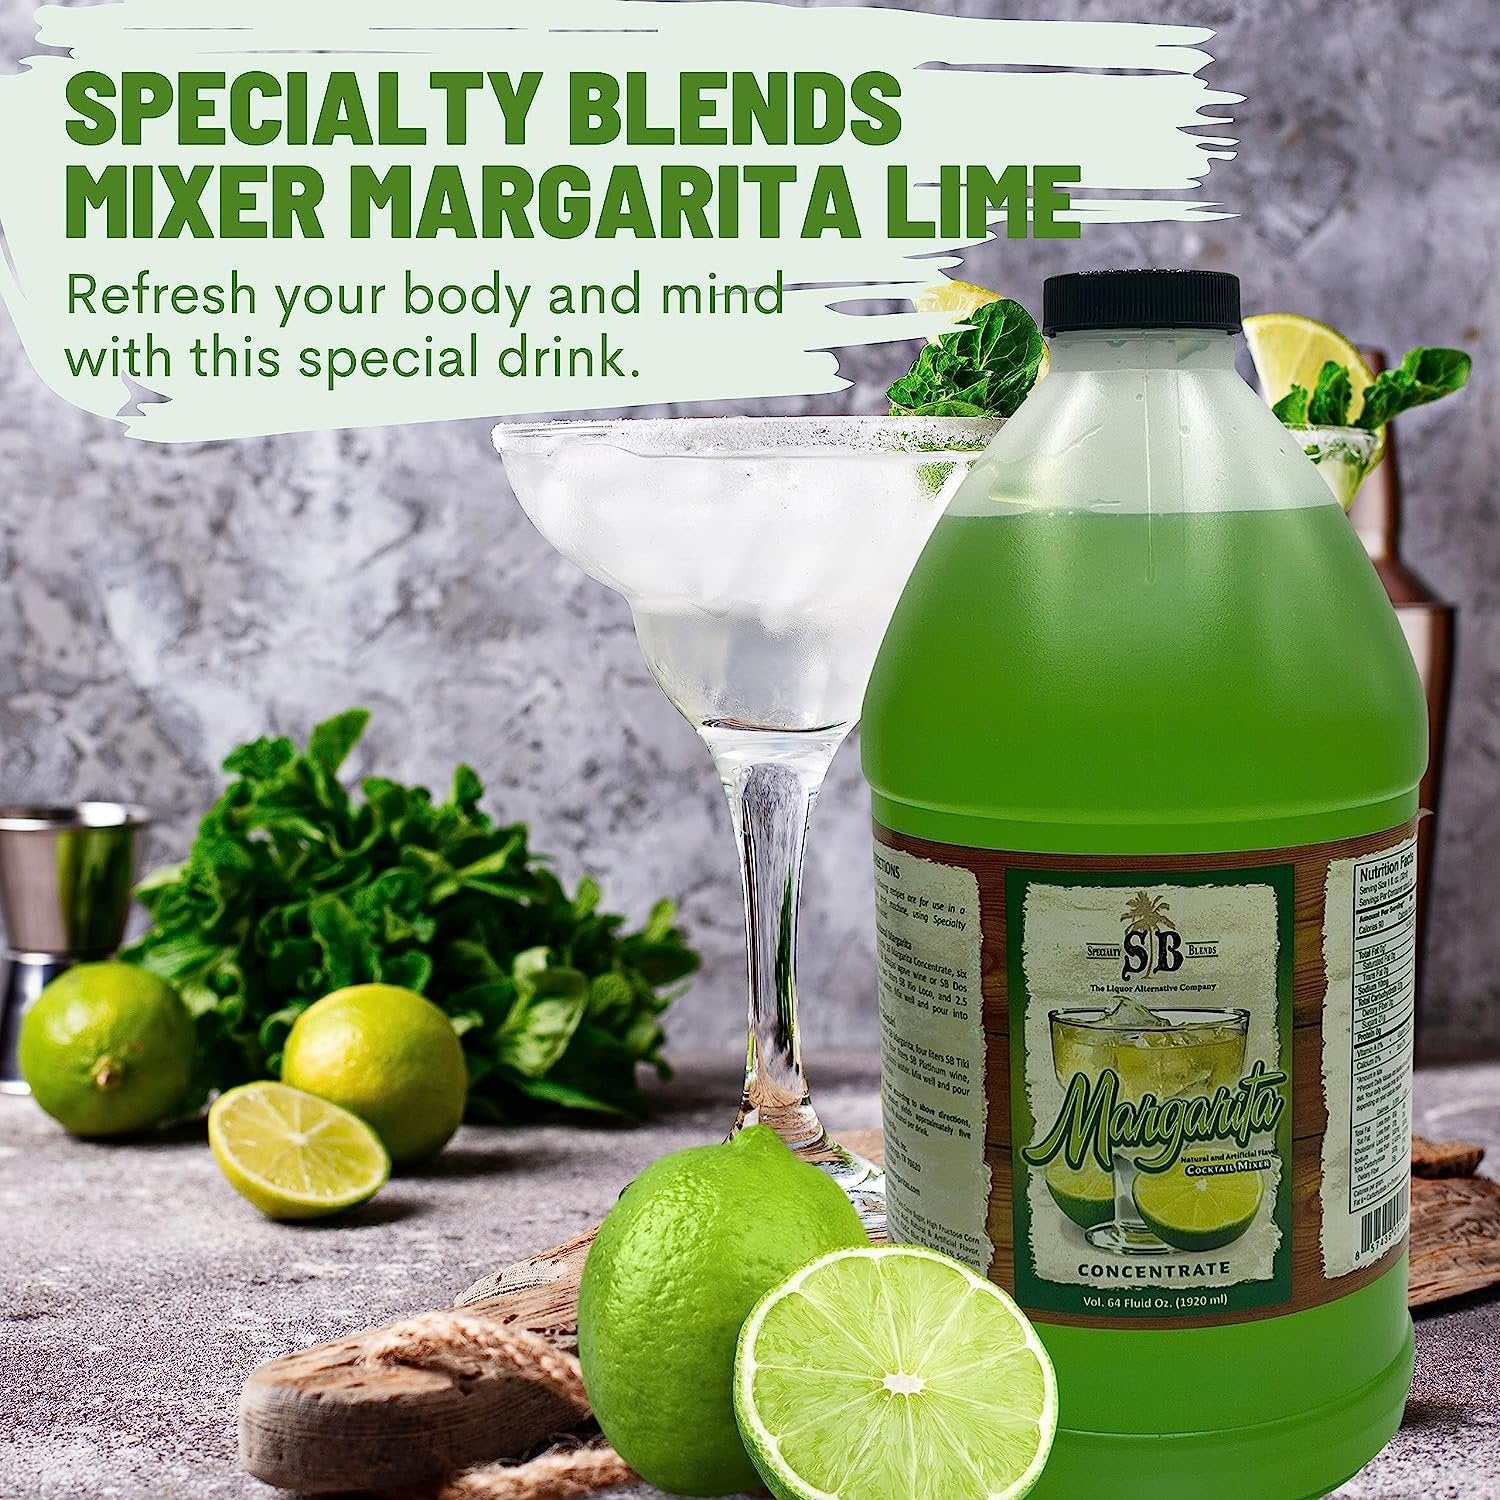 Specialty Blends Margarita Lime Drink Mixers And Syrups - Margarita Mix Lime Concentrate, Organic Lime 1/2 Gallon Drink Mix (Pack of 1) - with Bonus Worldwide Nutrition Multi Purpose Key Chain